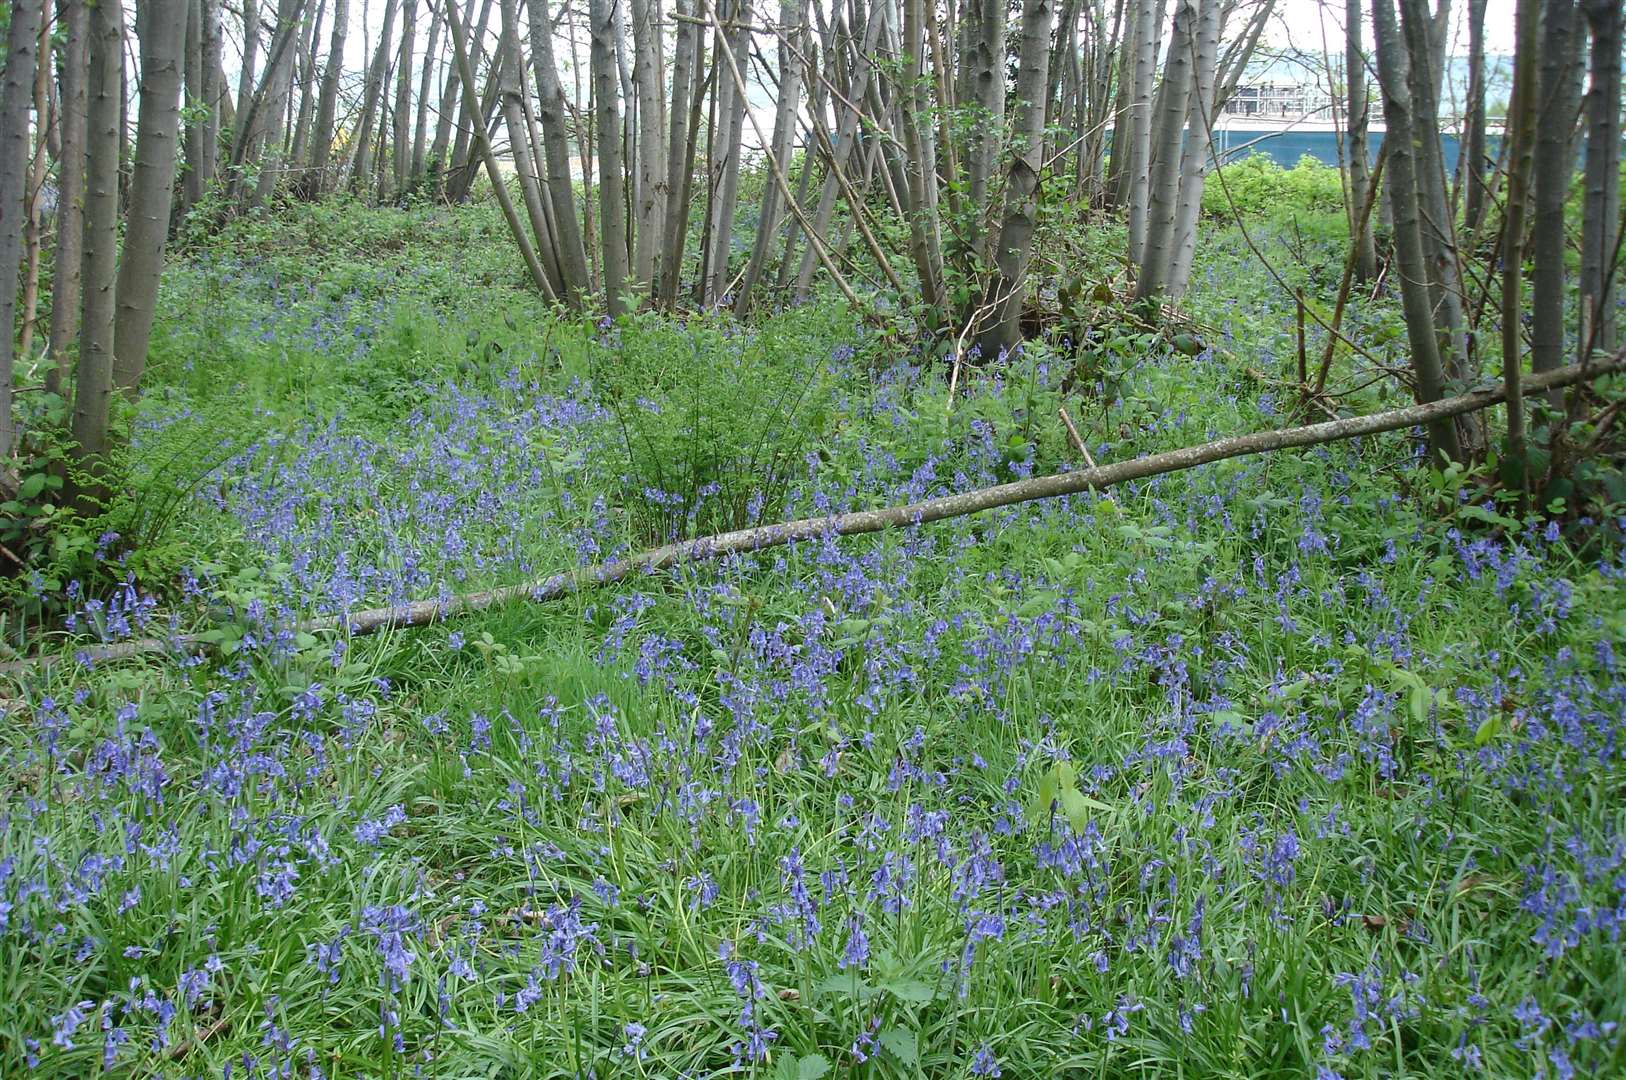 The bluebells are out in Bluebell Wood (1649183)